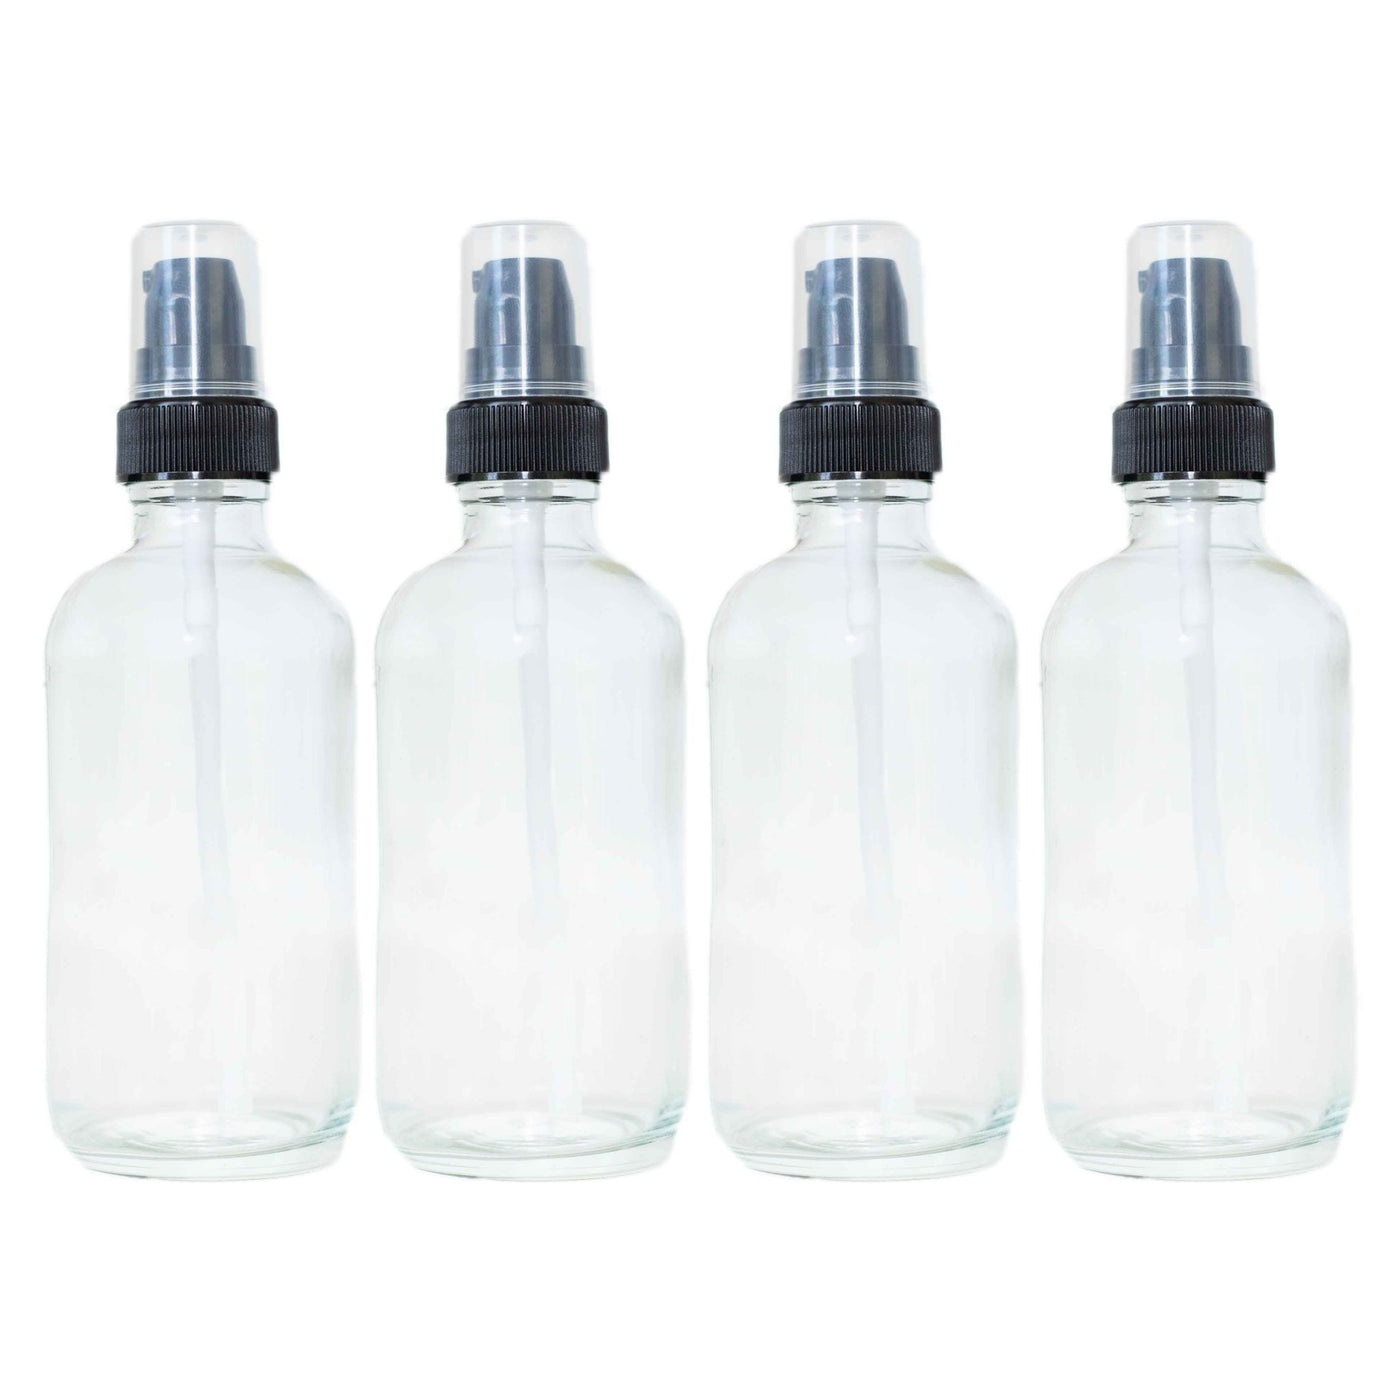 4oz Clear Glass Bottles (Small Pump Top) - Miracle Botanicals Essential Oils